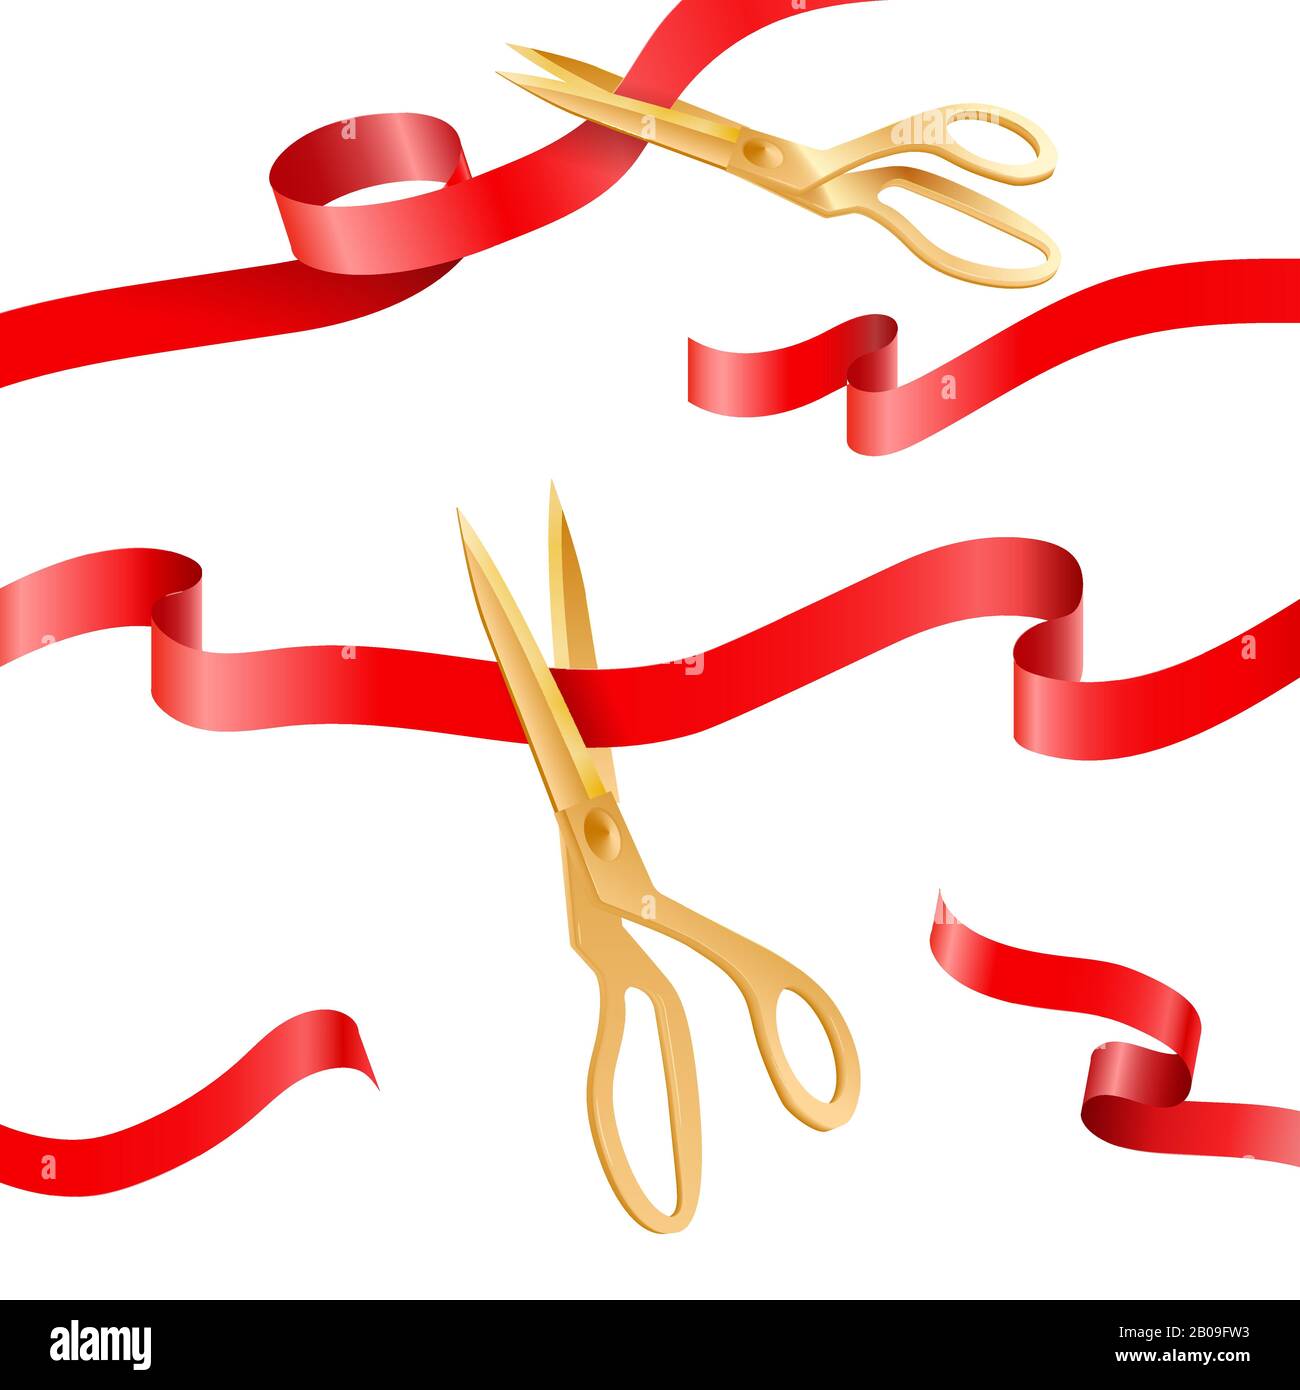 Golden scissors cutting ceremony silk ribbons vector elements for opening ceremony, event concept. Important ceremony with ribbon tape illustration Stock Vector